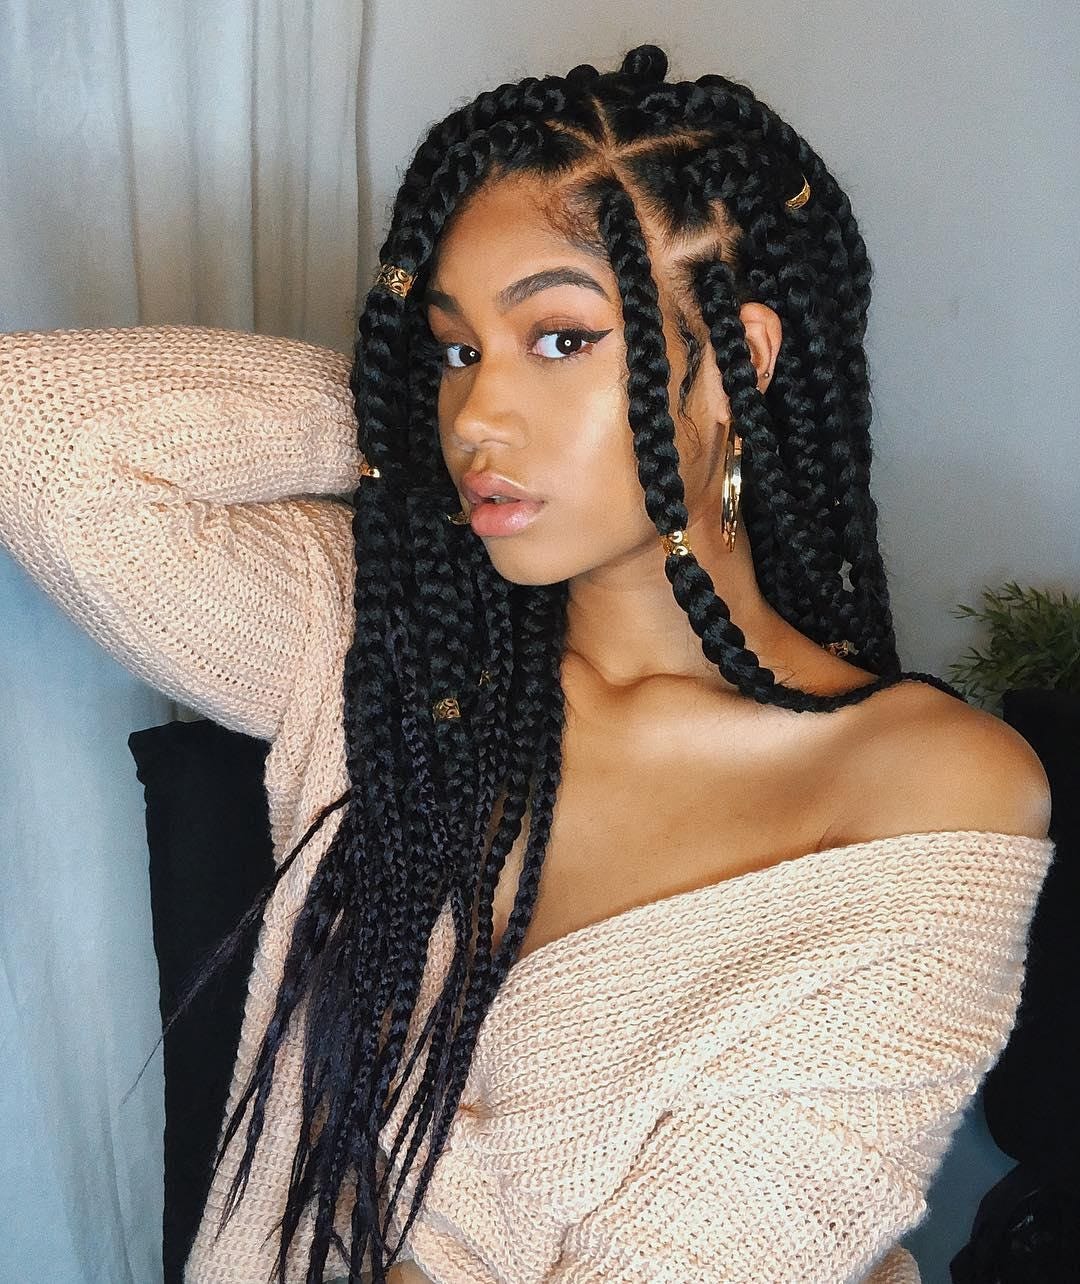 Large Box Braids On Natural Hair, No Extensions